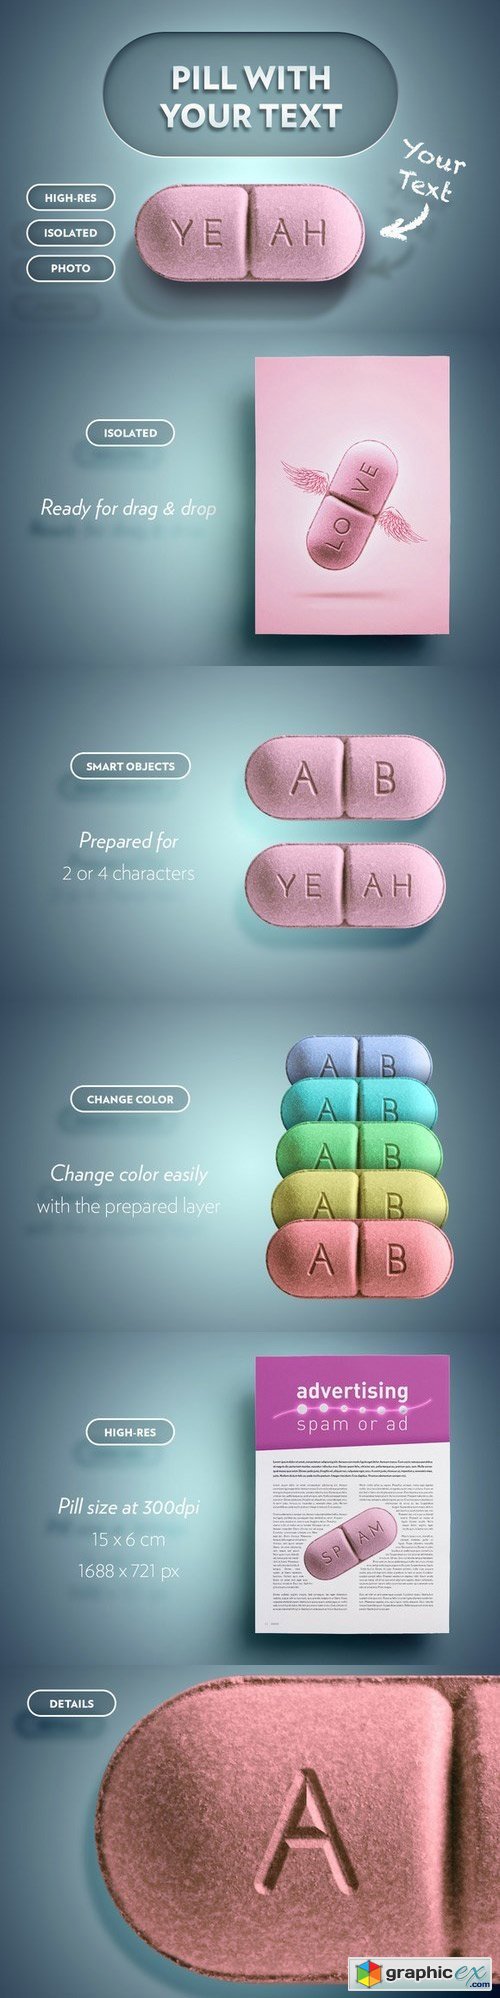 Pill with your text